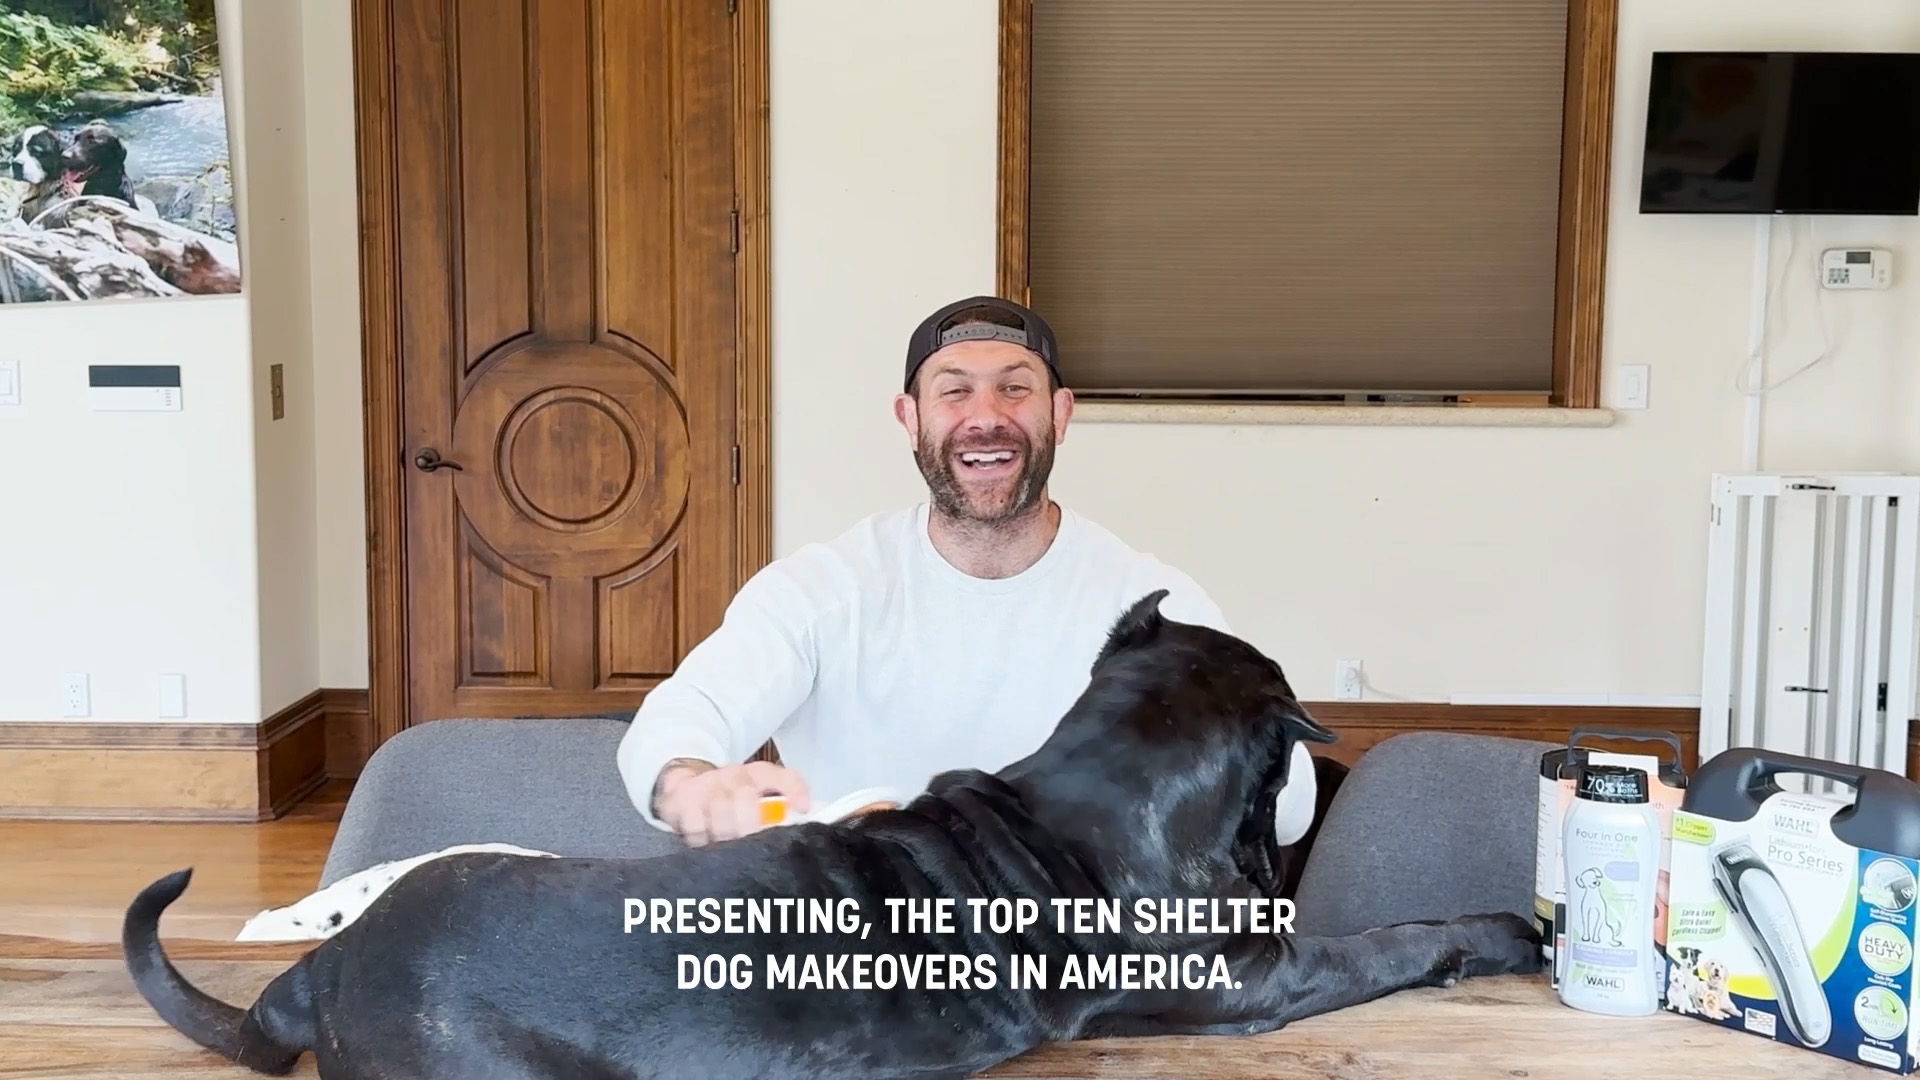 AMERICA'S 10 MOST AMAZING SHELTER DOG MAKEOVERS UNLEASHED